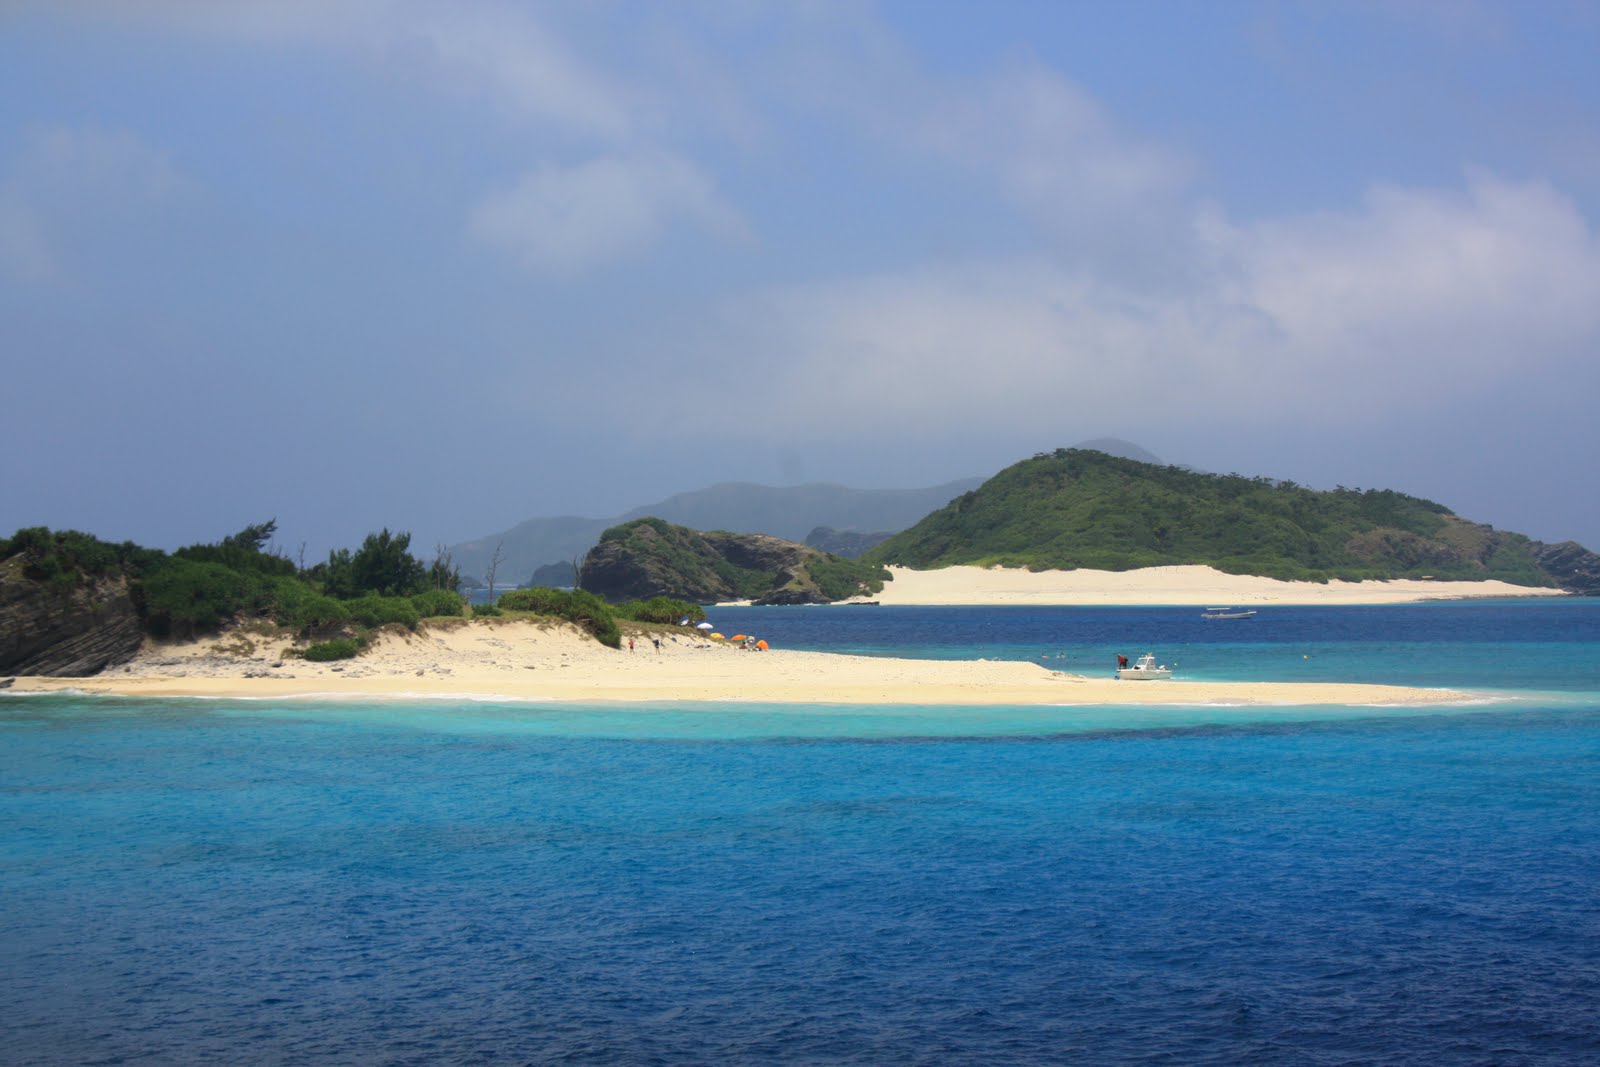 Mary and Sean's Adventures Abroad: Exploring Zamami Island